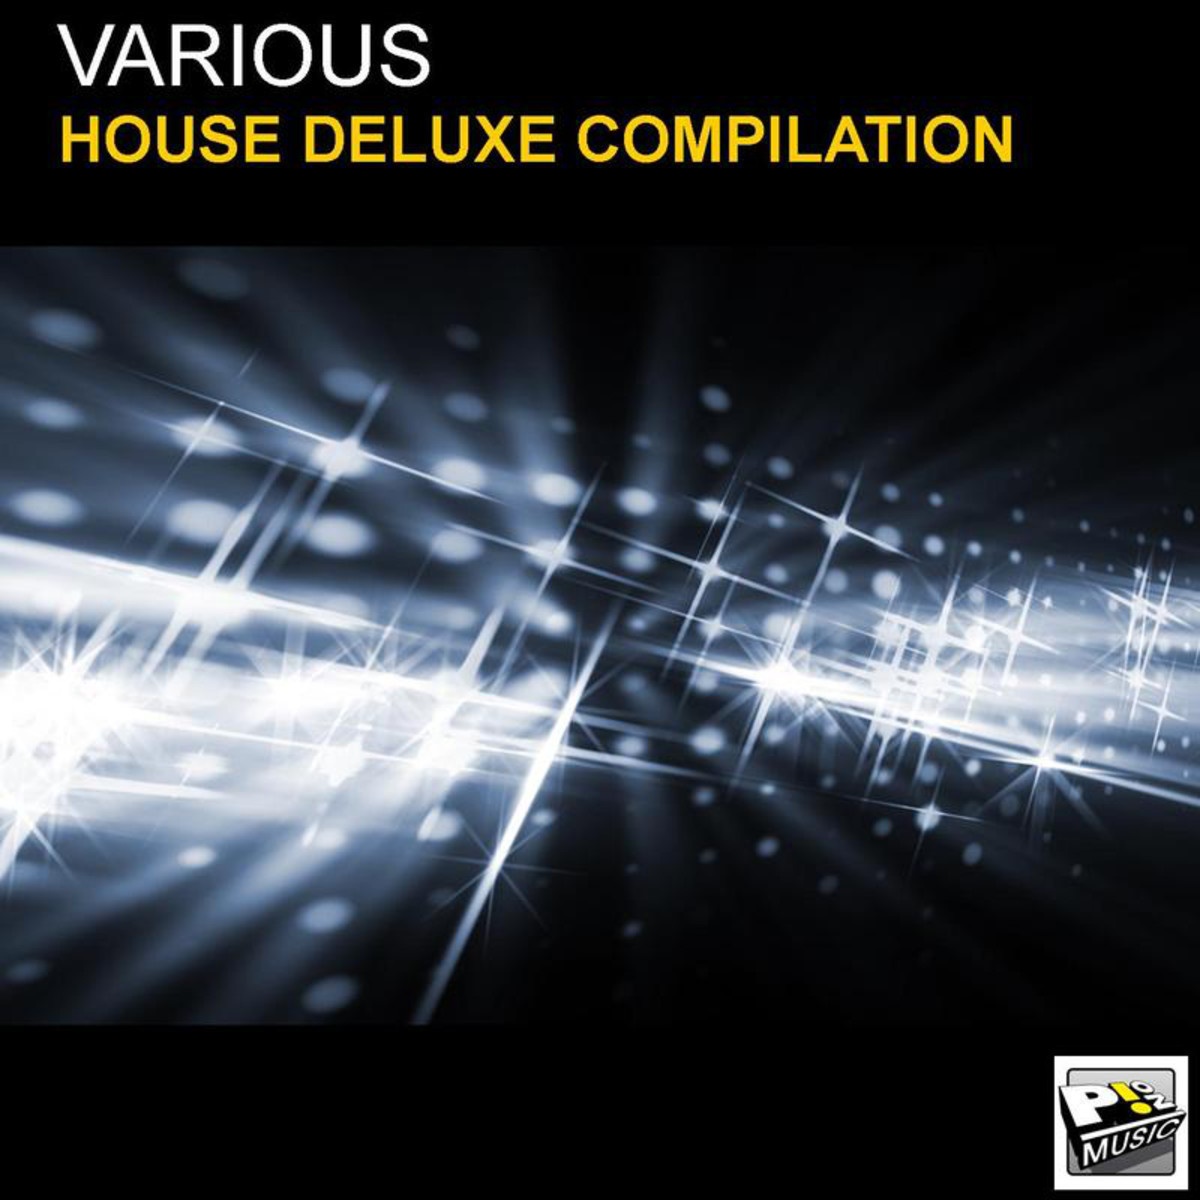 House Deluxe Compilation